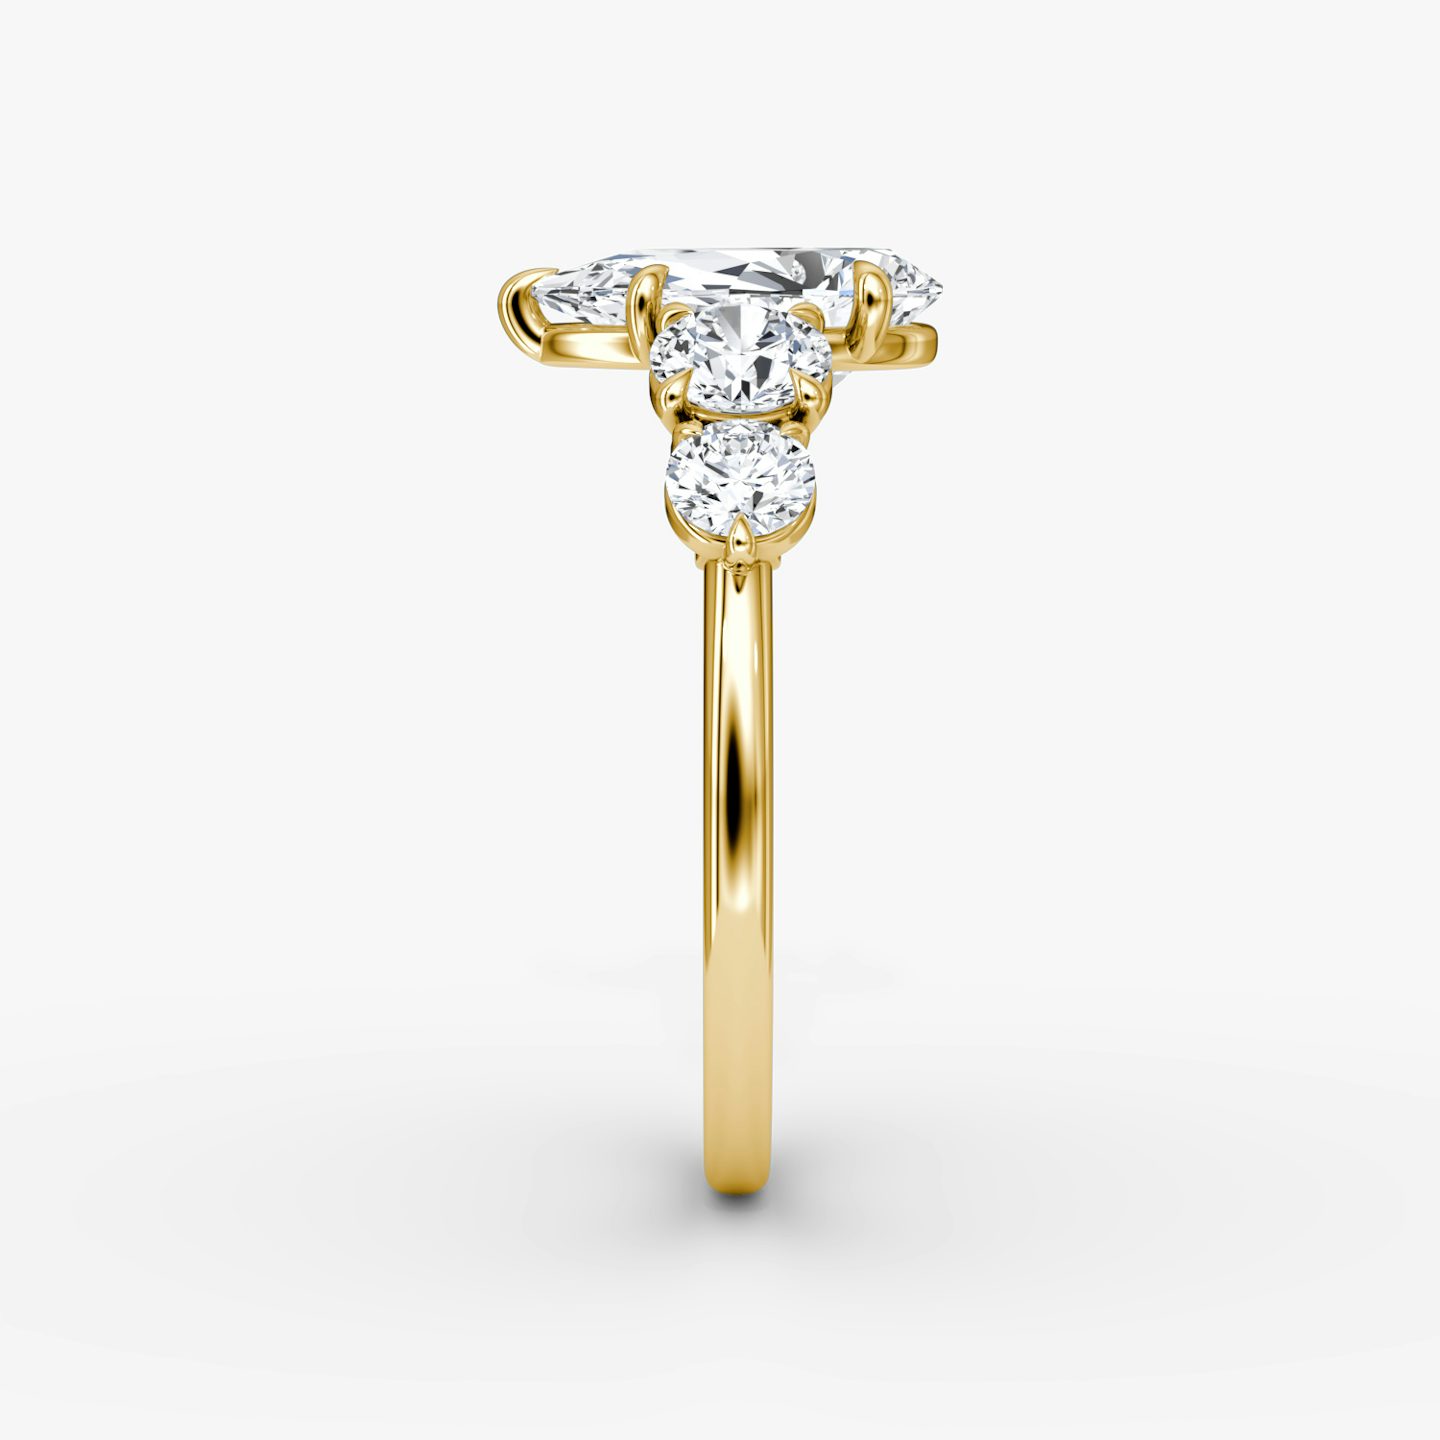 undefined | Pear | 18k | Yellow Gold | bandAccent: Plain | diamondOrientation: vertical | caratWeight: other